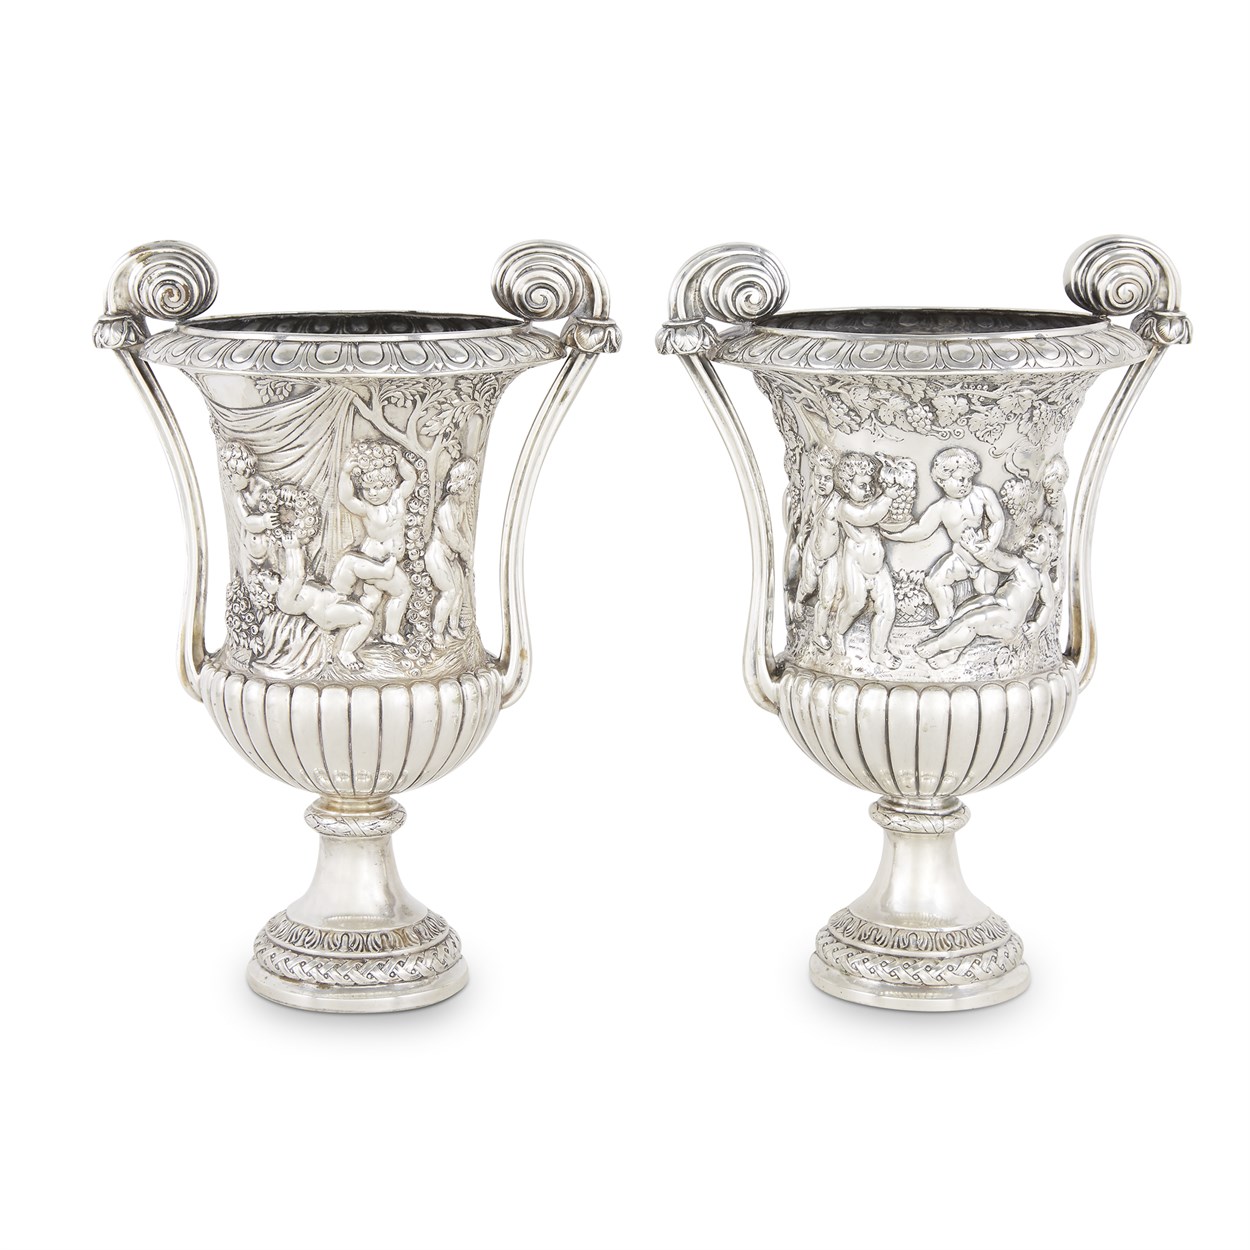 Lot 95 - A pair of German silver Renaissance Revival urn-form wine coolers